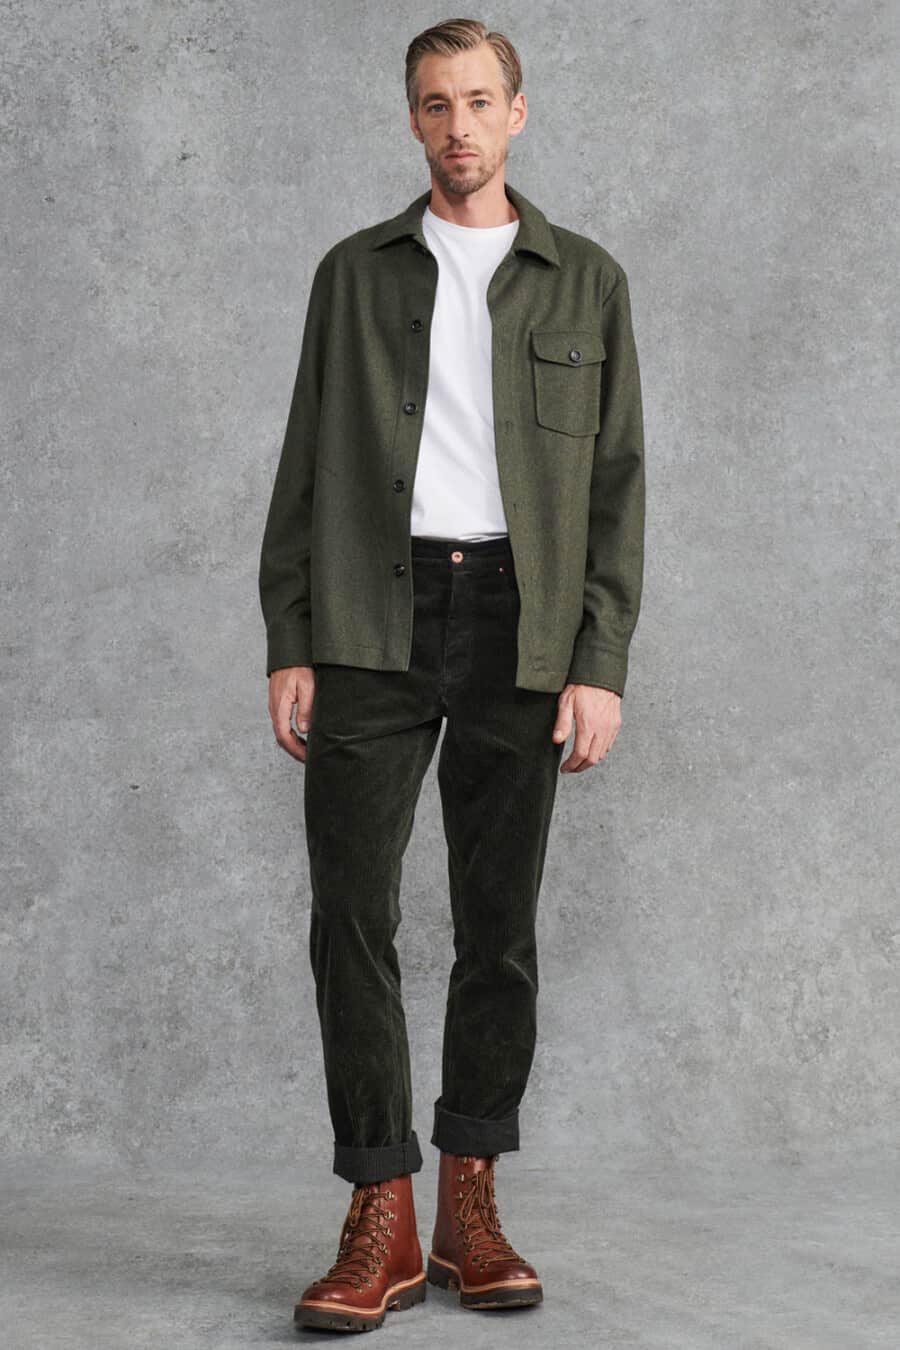 Men's green corduroy pants, tucked in white T-shirt, open green flannel overshirt and brown leather military boots outfit